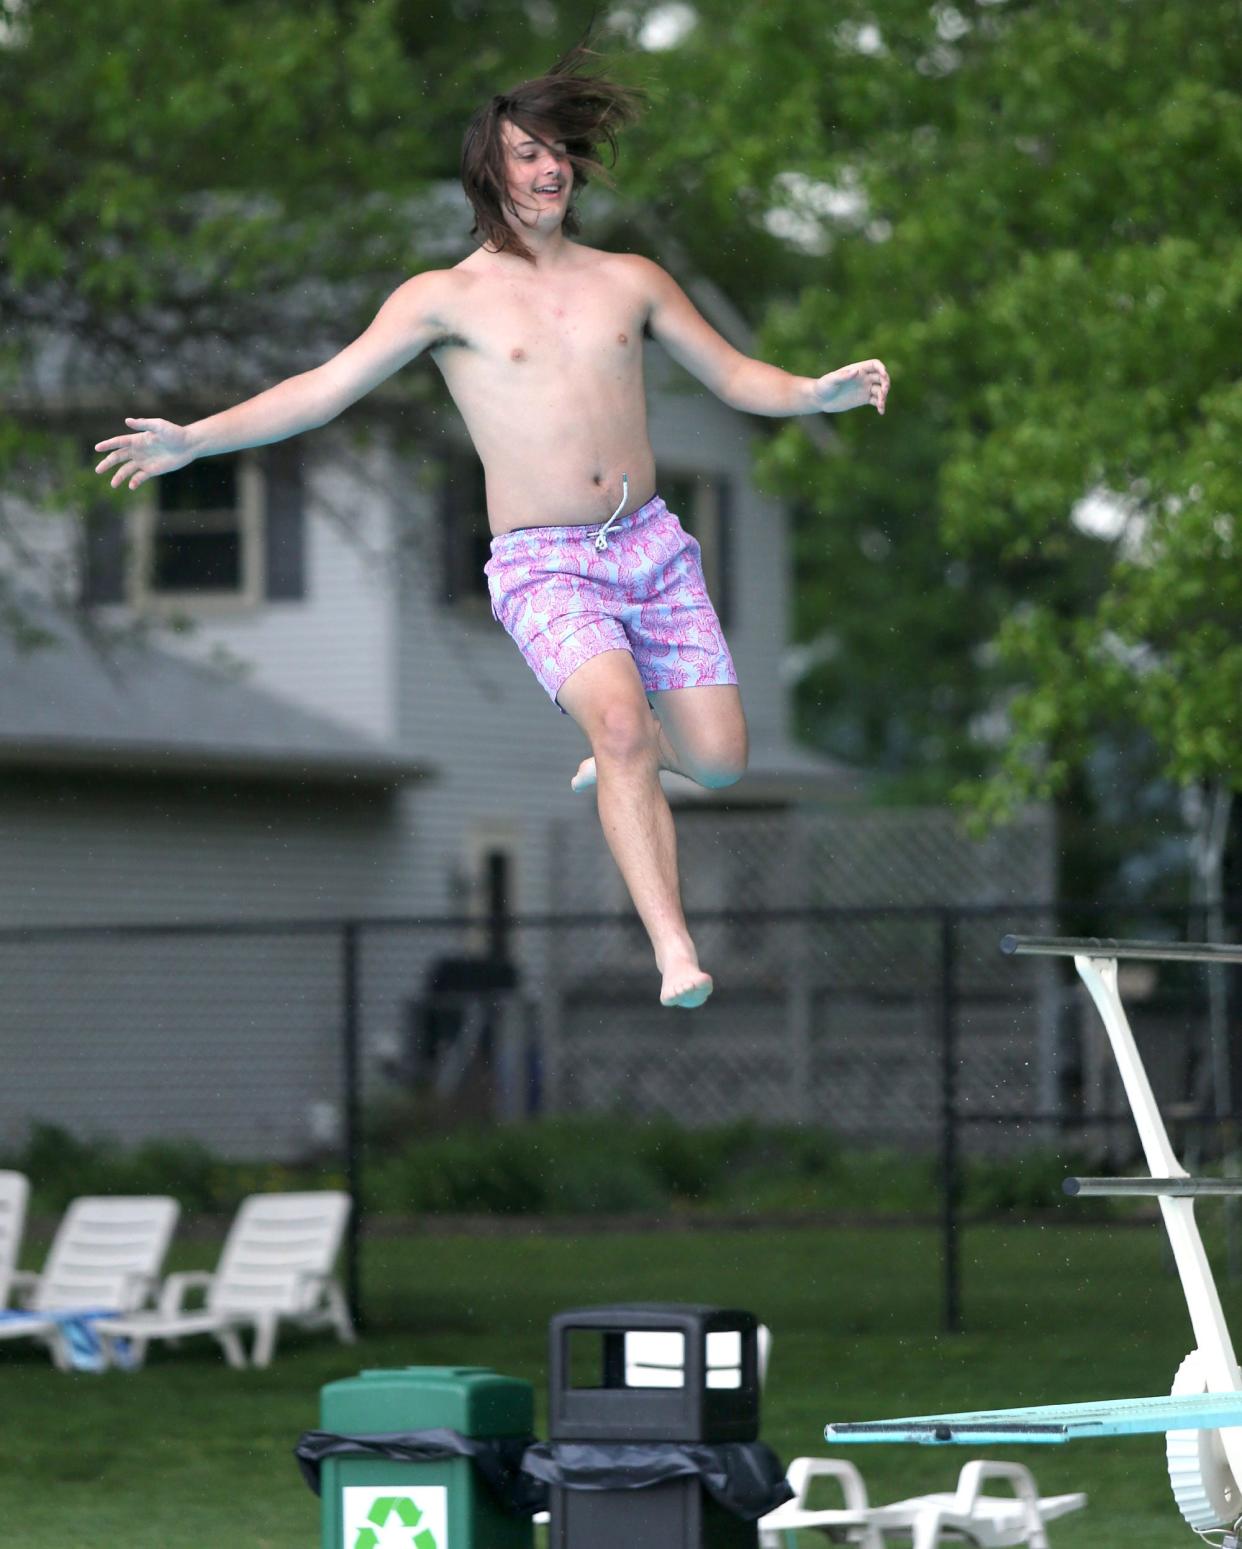 Cole Rembielak catches some air after going off the diving board at Dogwood Pool in North Canton. Dogwood is one of the Stark County locations slated to get funding in Ohio's capital budget.